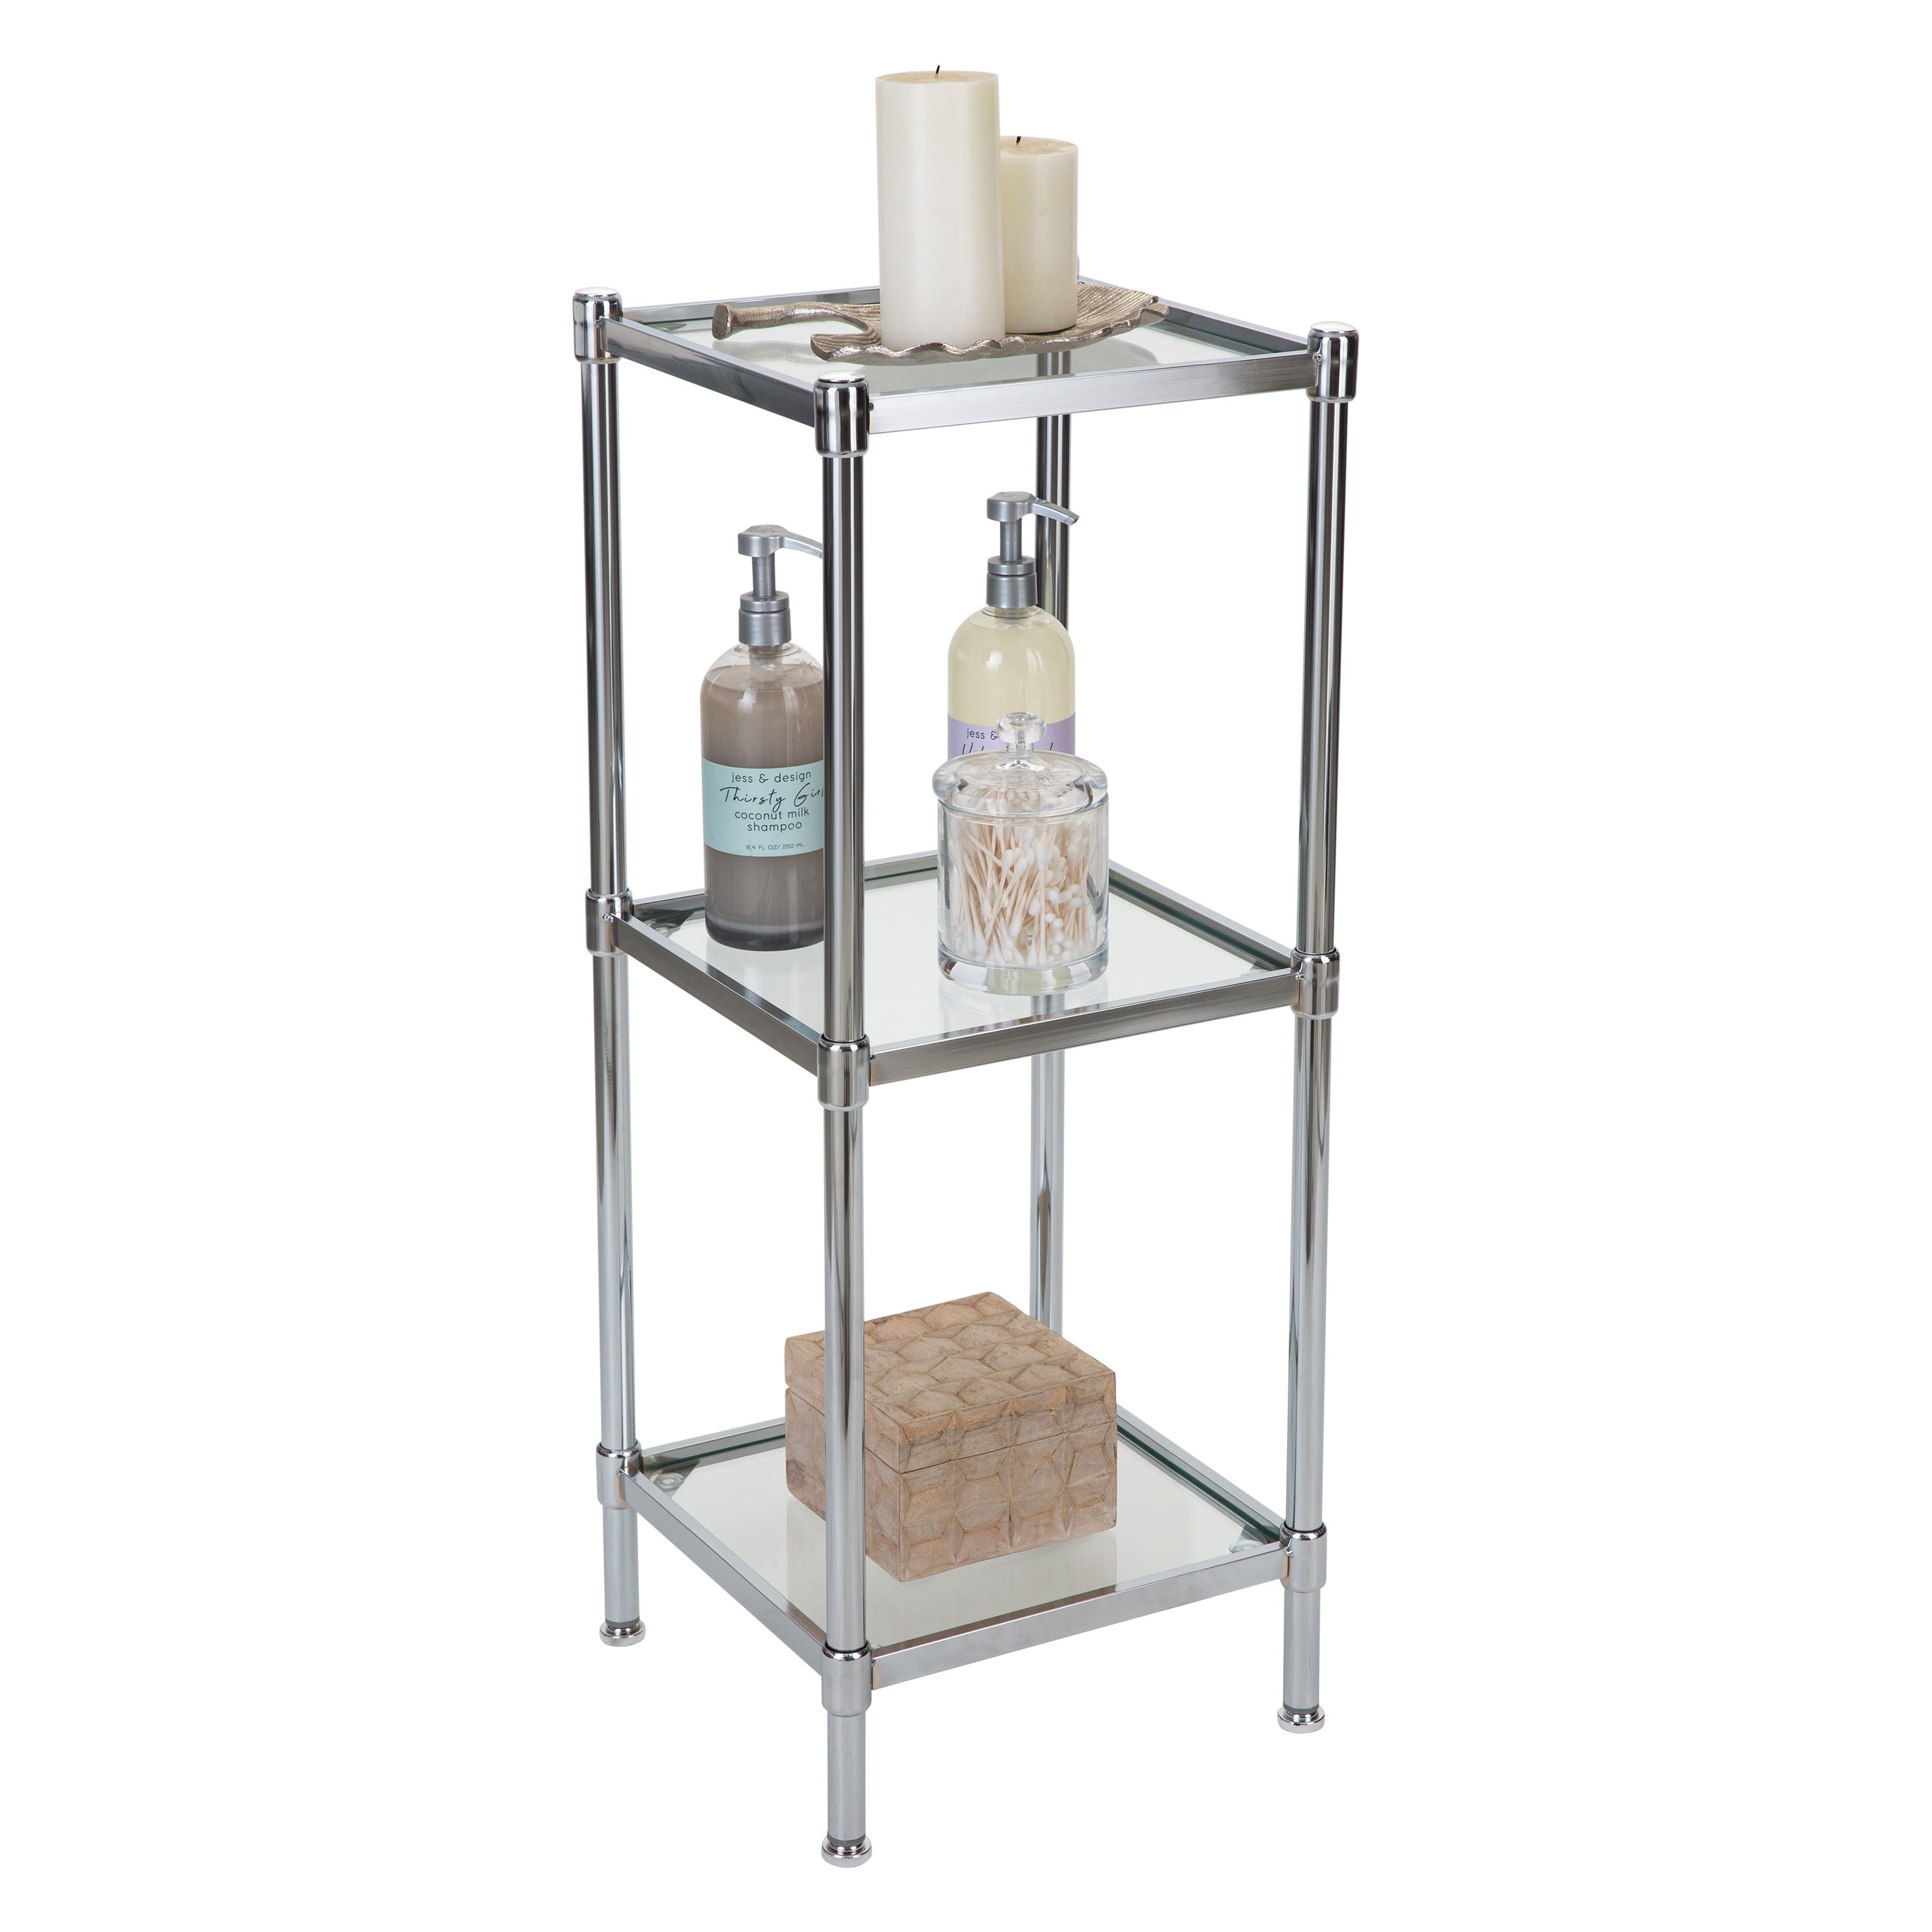 Organize It All 3 Tier Freestanding Steel Tempered Glass Shelving Tower - image 4 of 7